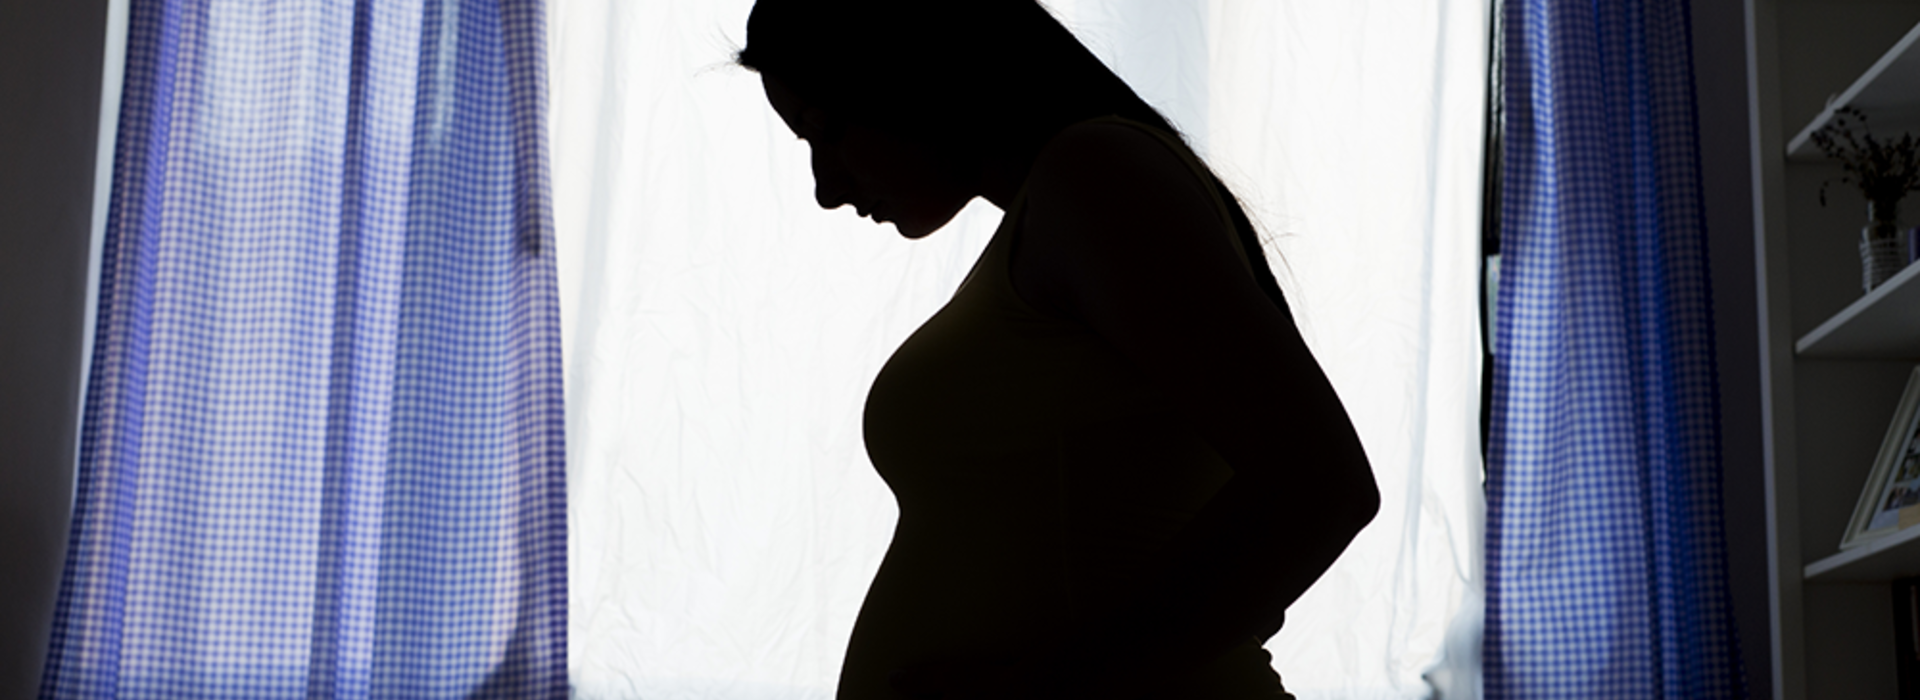 A silhouette of a pregnant woman in front of a large window.